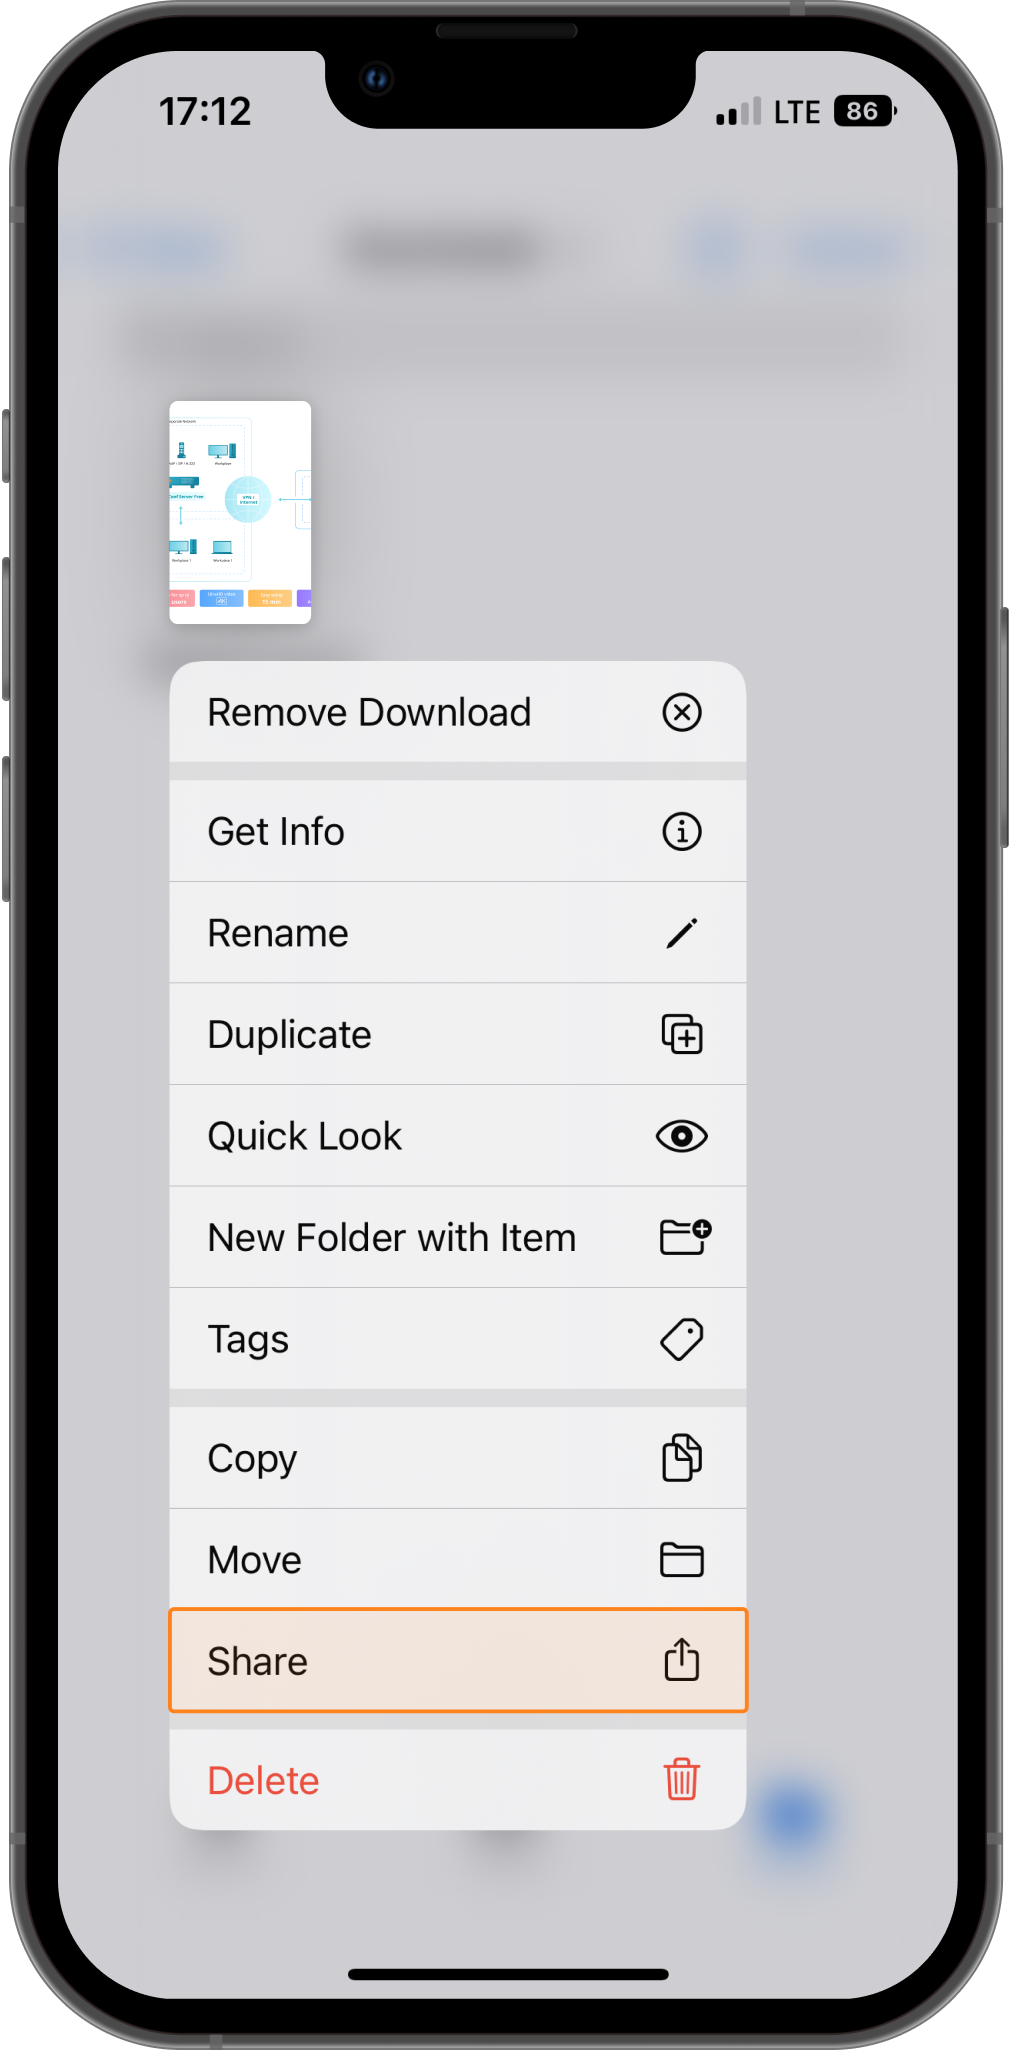 TrueConf 3.4 for iOS: File sharing and audio-only mode 7